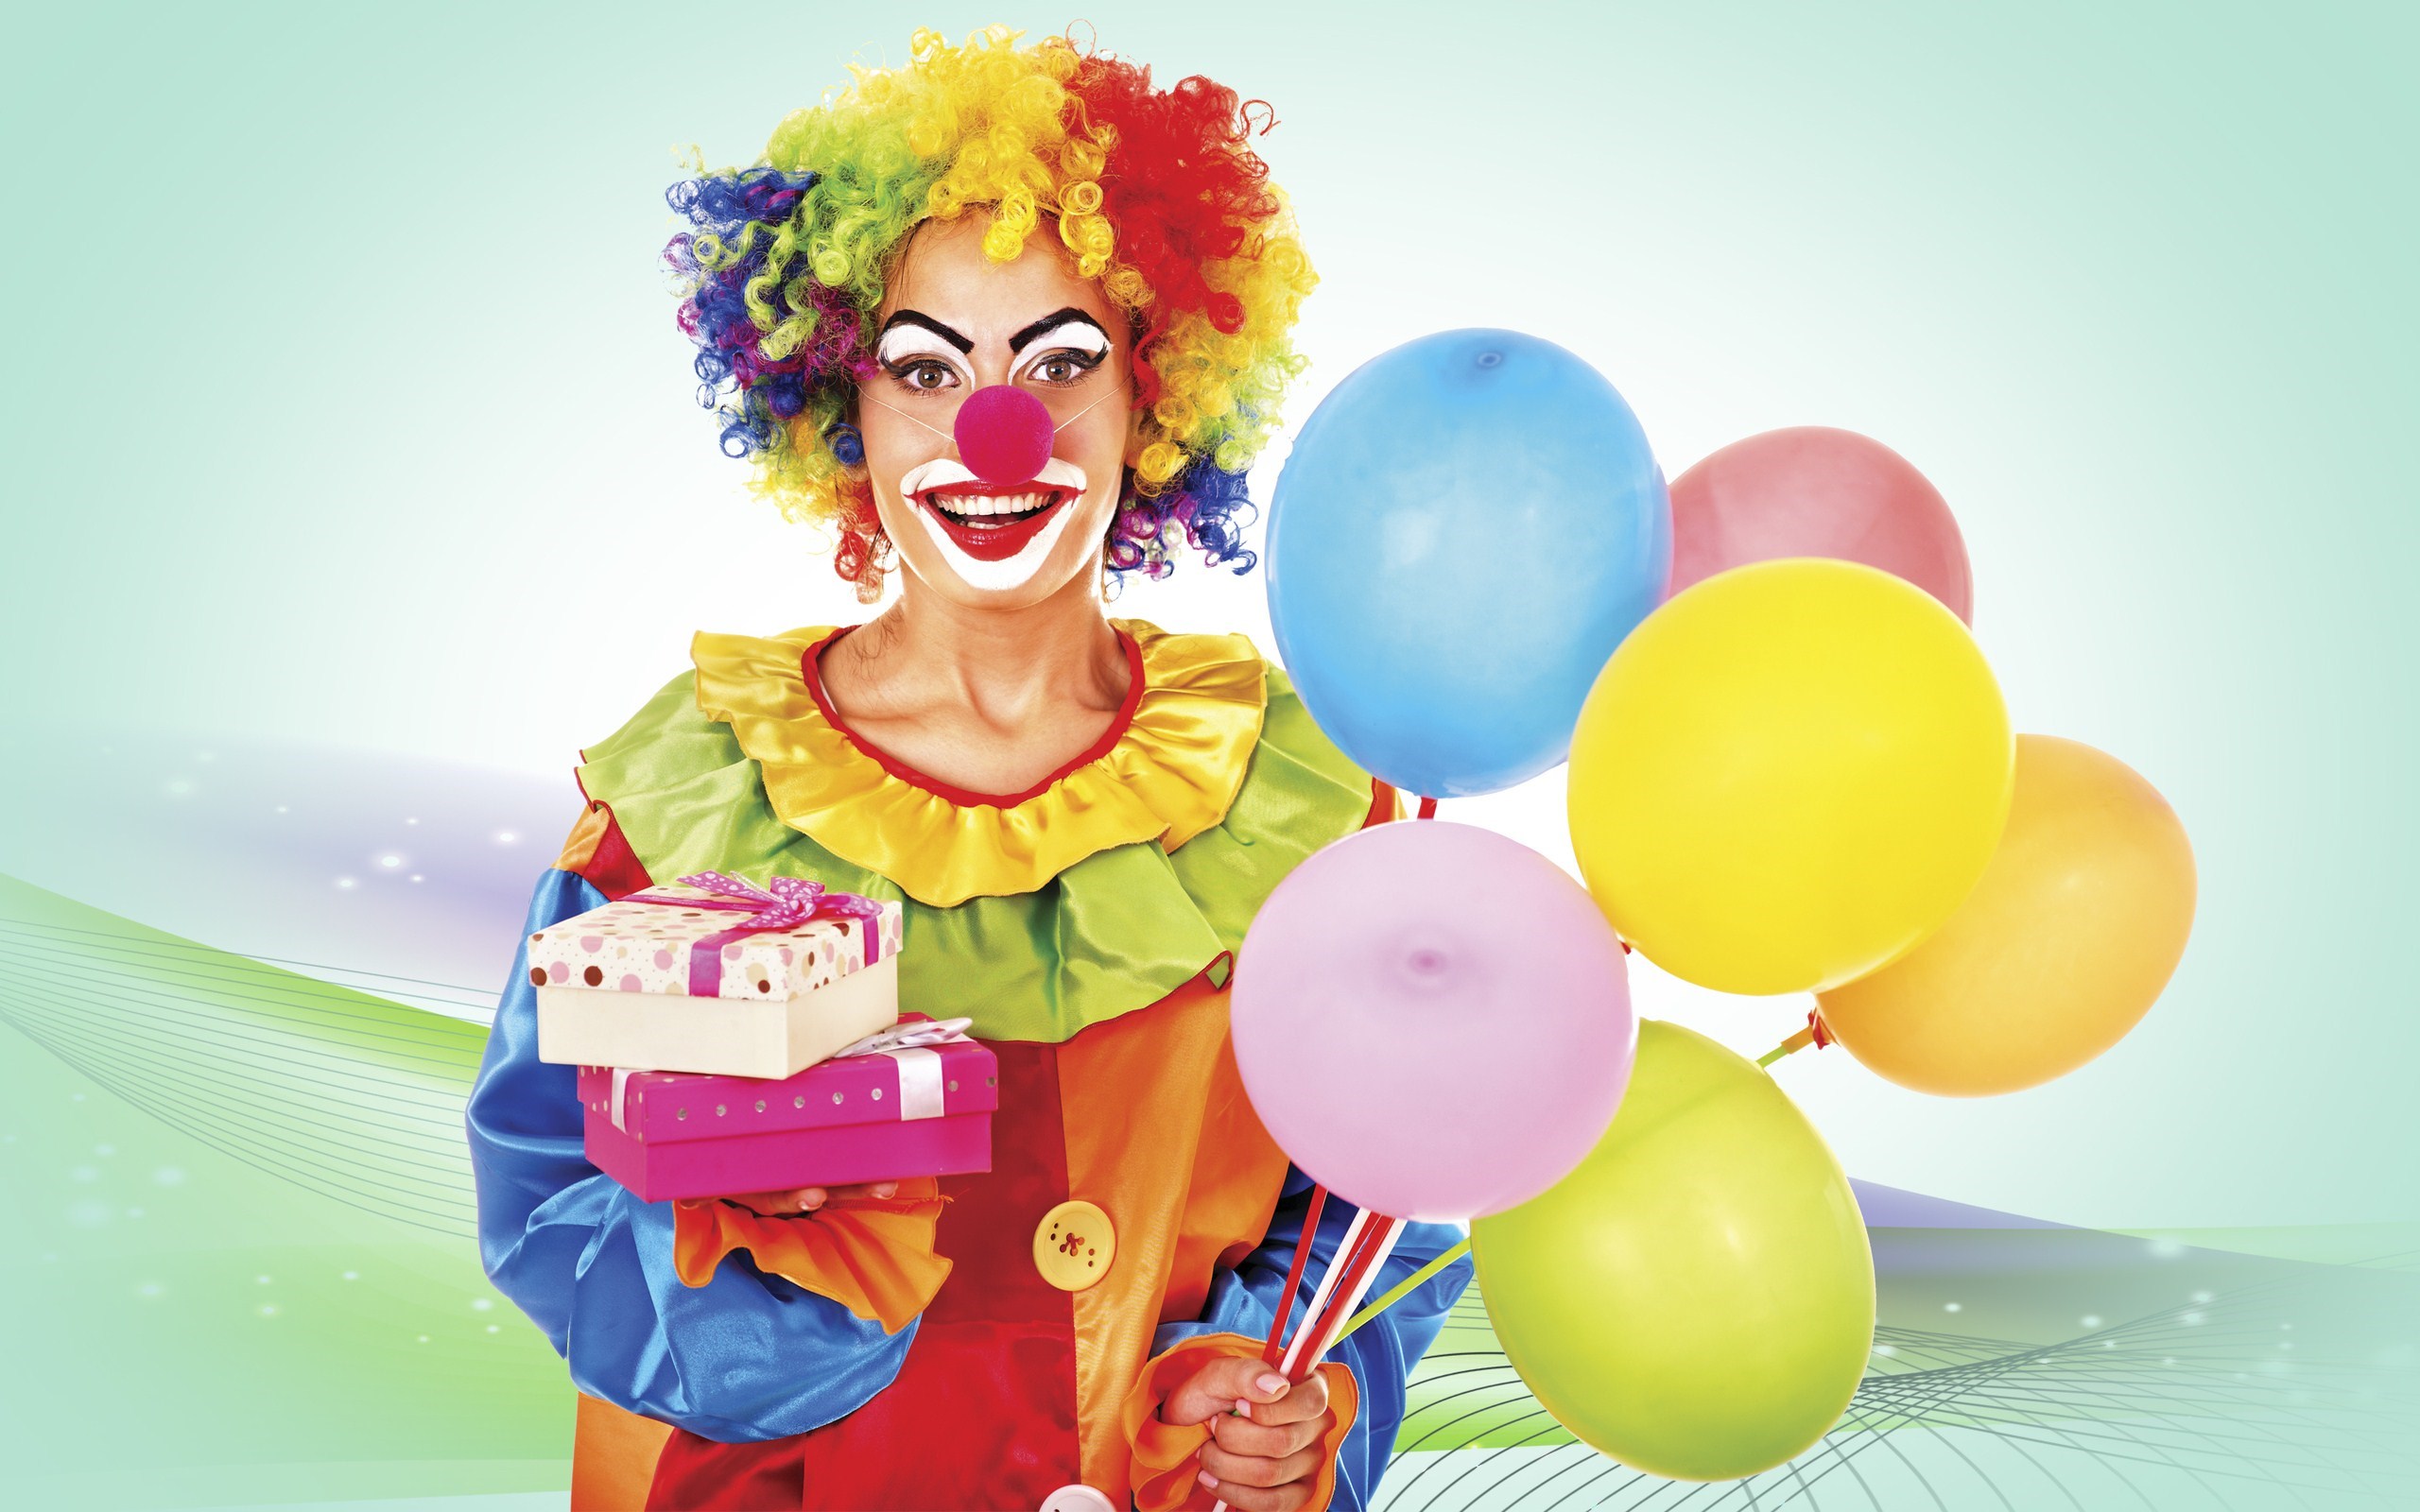 Funny Clown Balloons Gifts #7006984